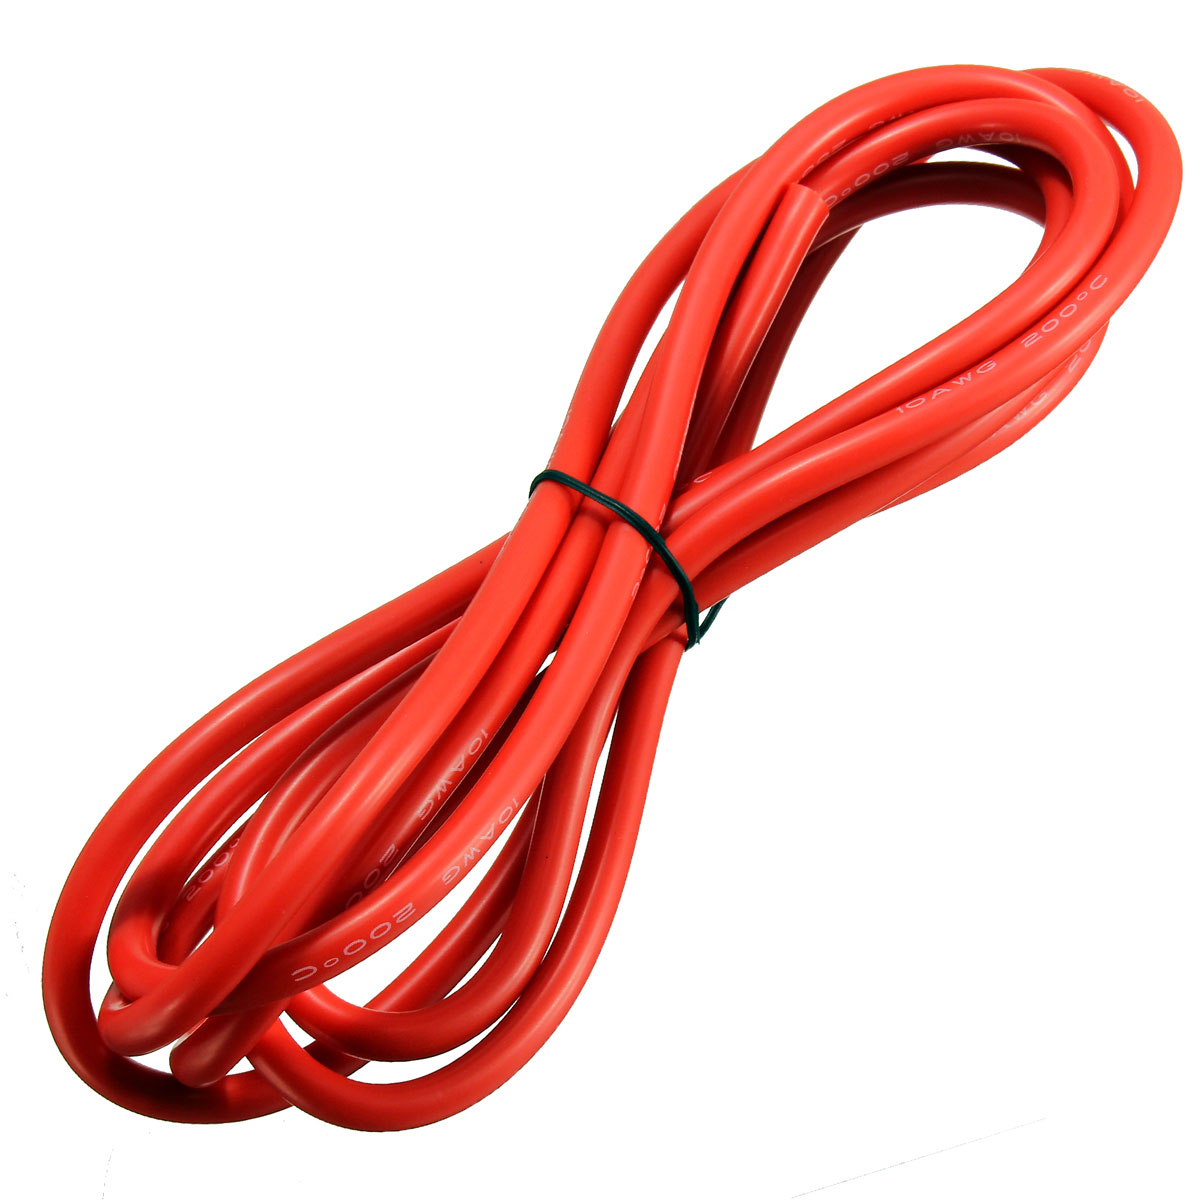 DANIU-2-Meter-Red-Silicone-Wire-Cable-10121416182022AWG-Flexible-Cable-1170284-4